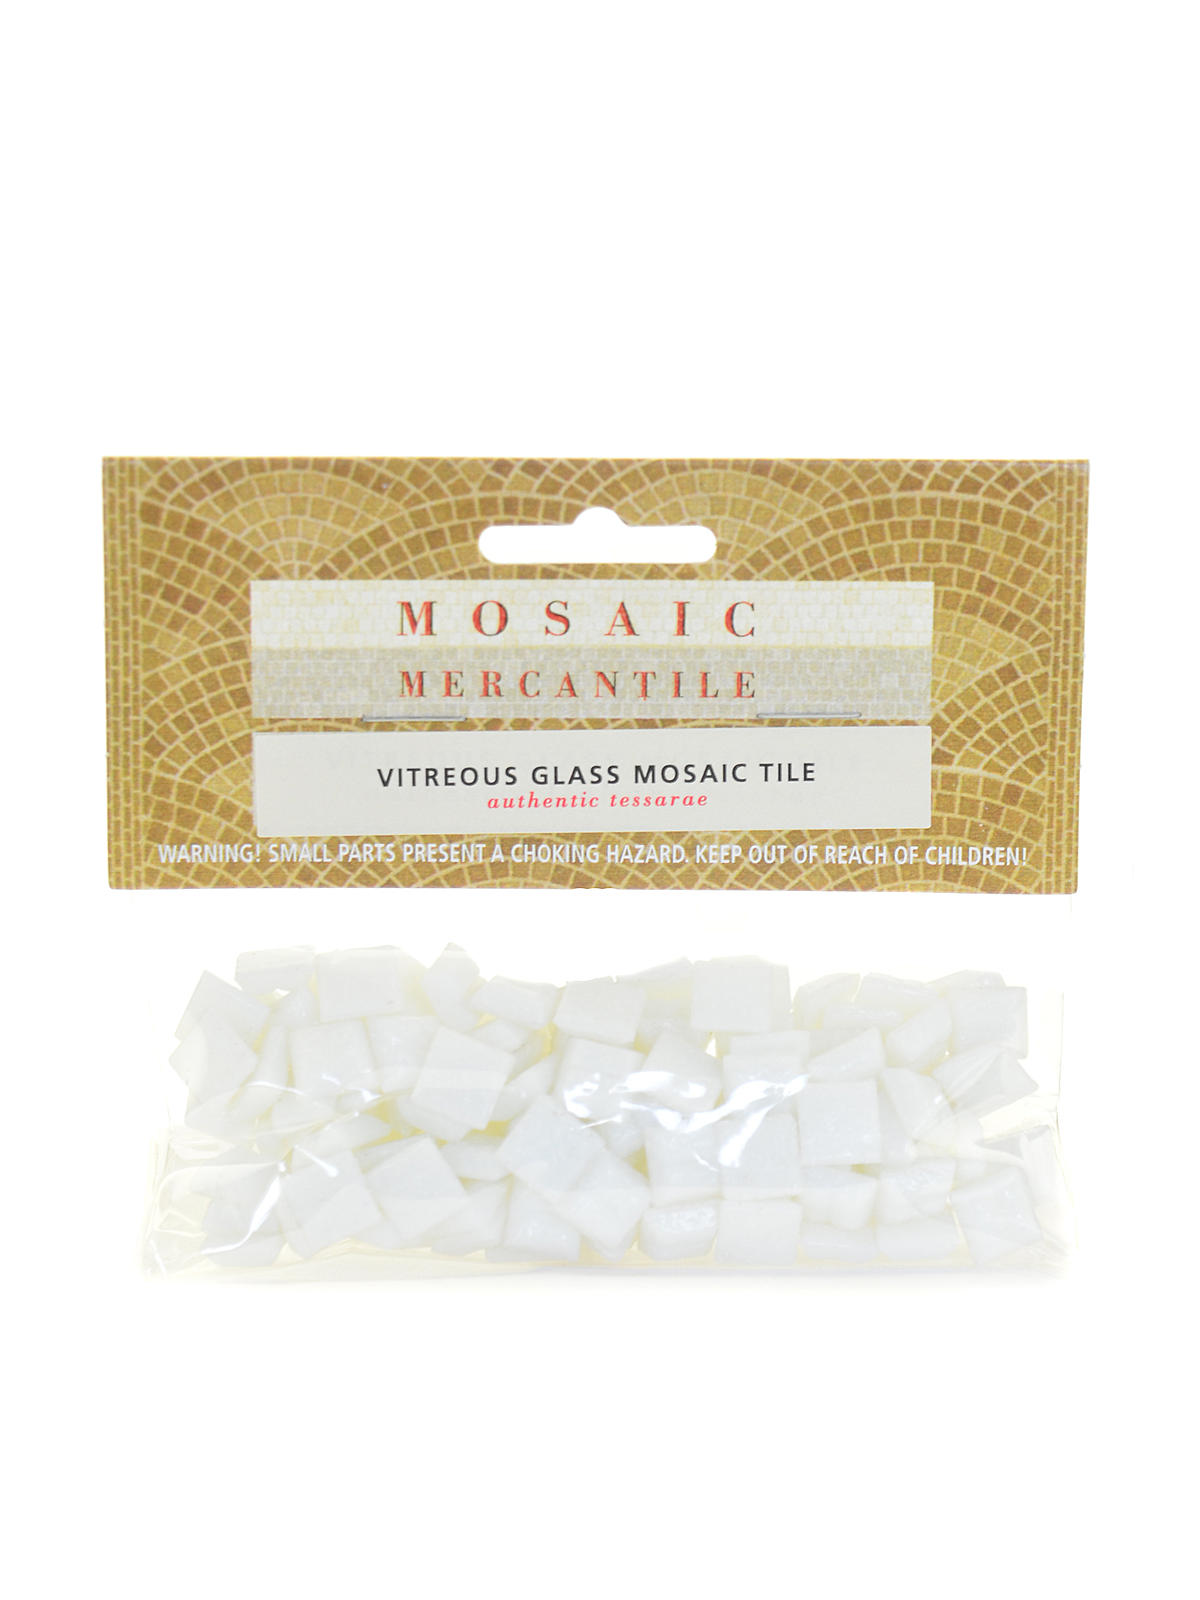 Solid Color Vitreous Glass Mosaic Tile White 3 8 In. 1 6 Lb. Bag